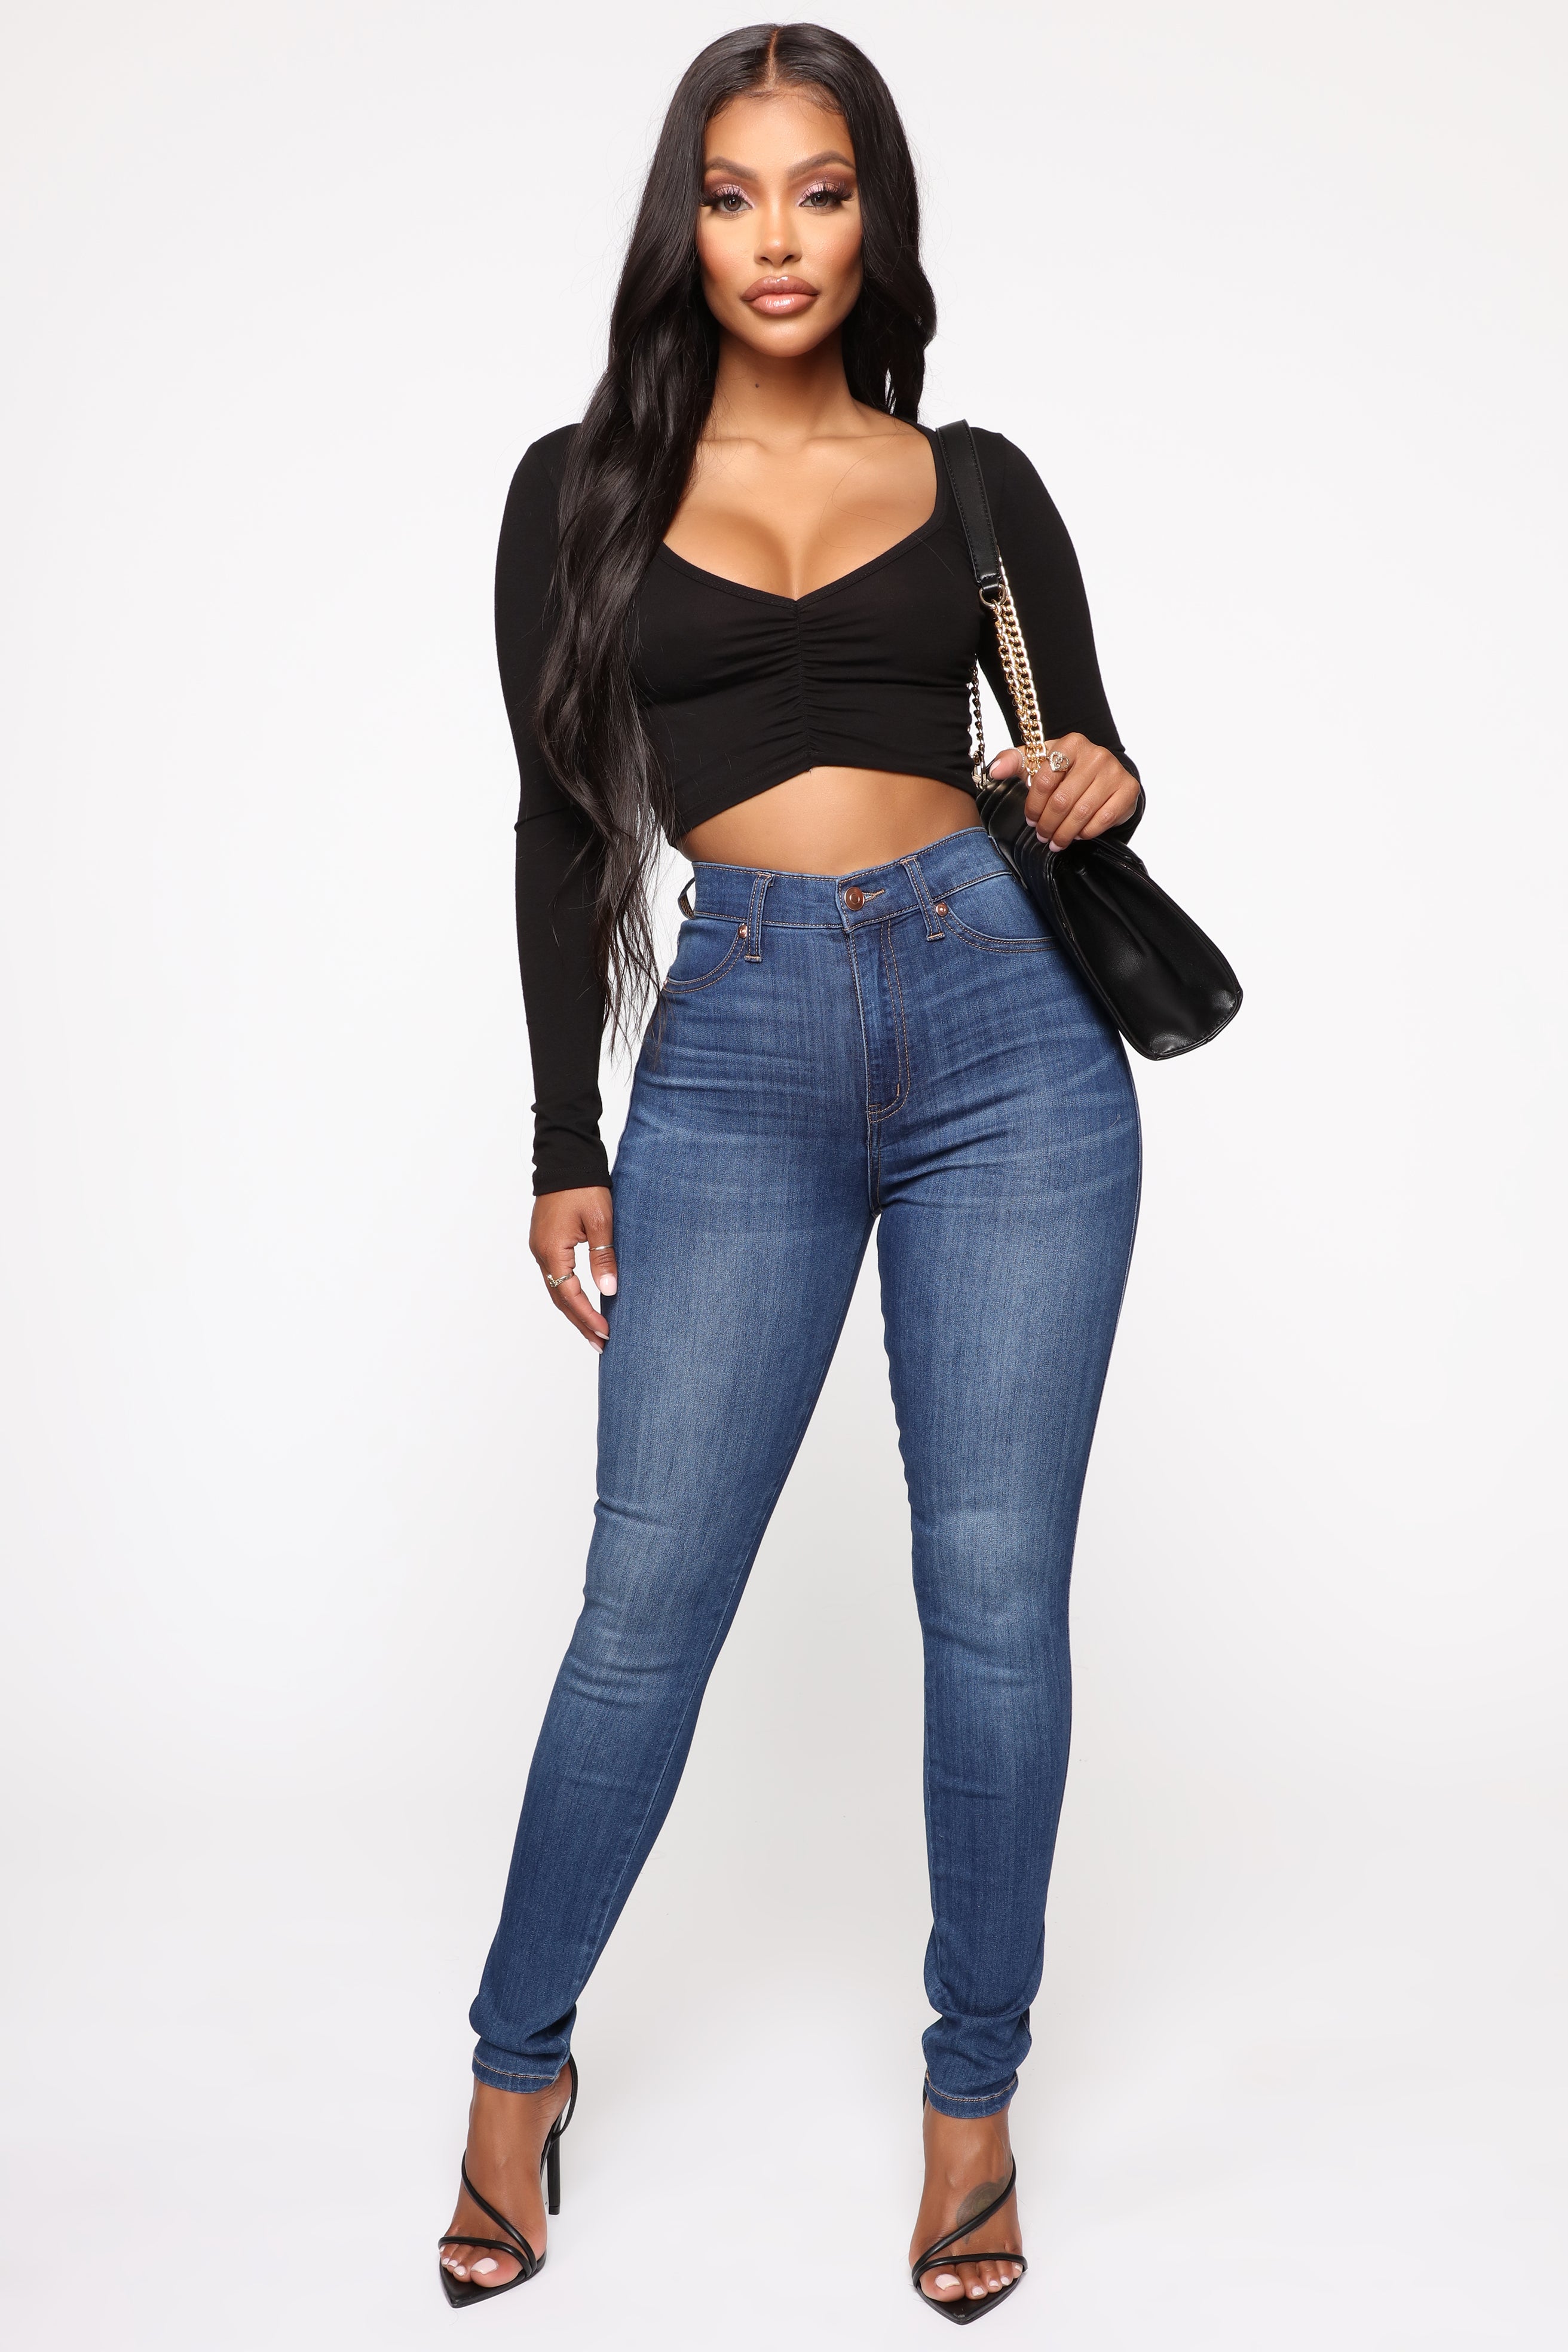 Highly recommend @FashionNovaCURVE jeans 😍 #fashionnova #fashionnovac, Fashion Nova